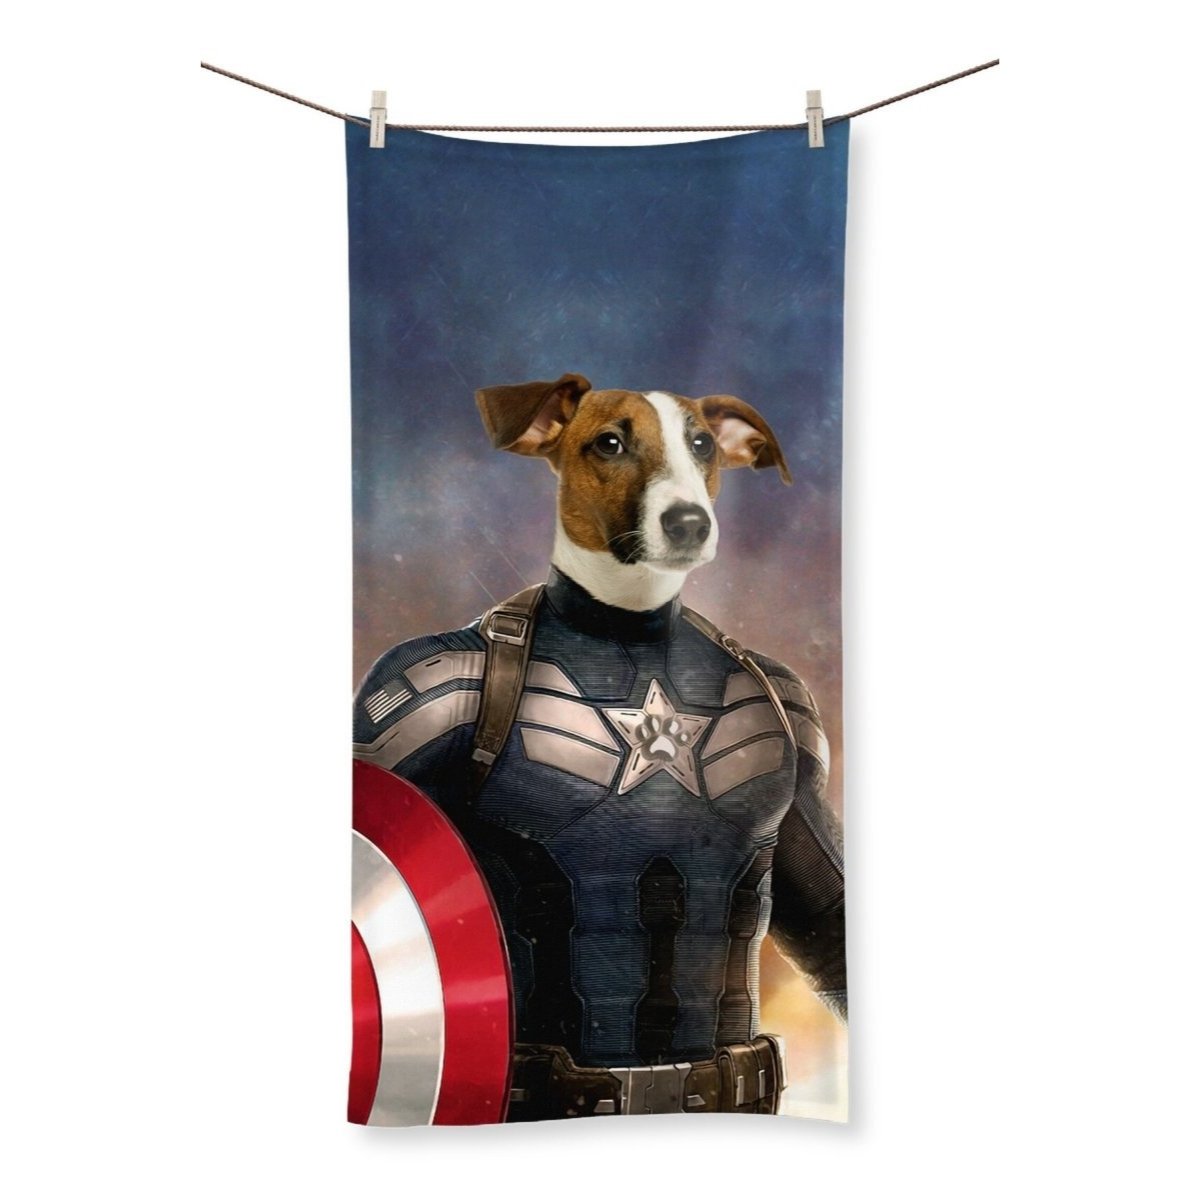 Captain America: Custom Pet Towel - Paw & Glory - #pet portraits# - #dog portraits# - #pet portraits uk#Paw & Glory, paw and glory, professional pet photos, painting of your dog, funny dog paintings, small dog portrait, dog portrait background colors, custom dog painting, pet portraits,pet portraits Towel,